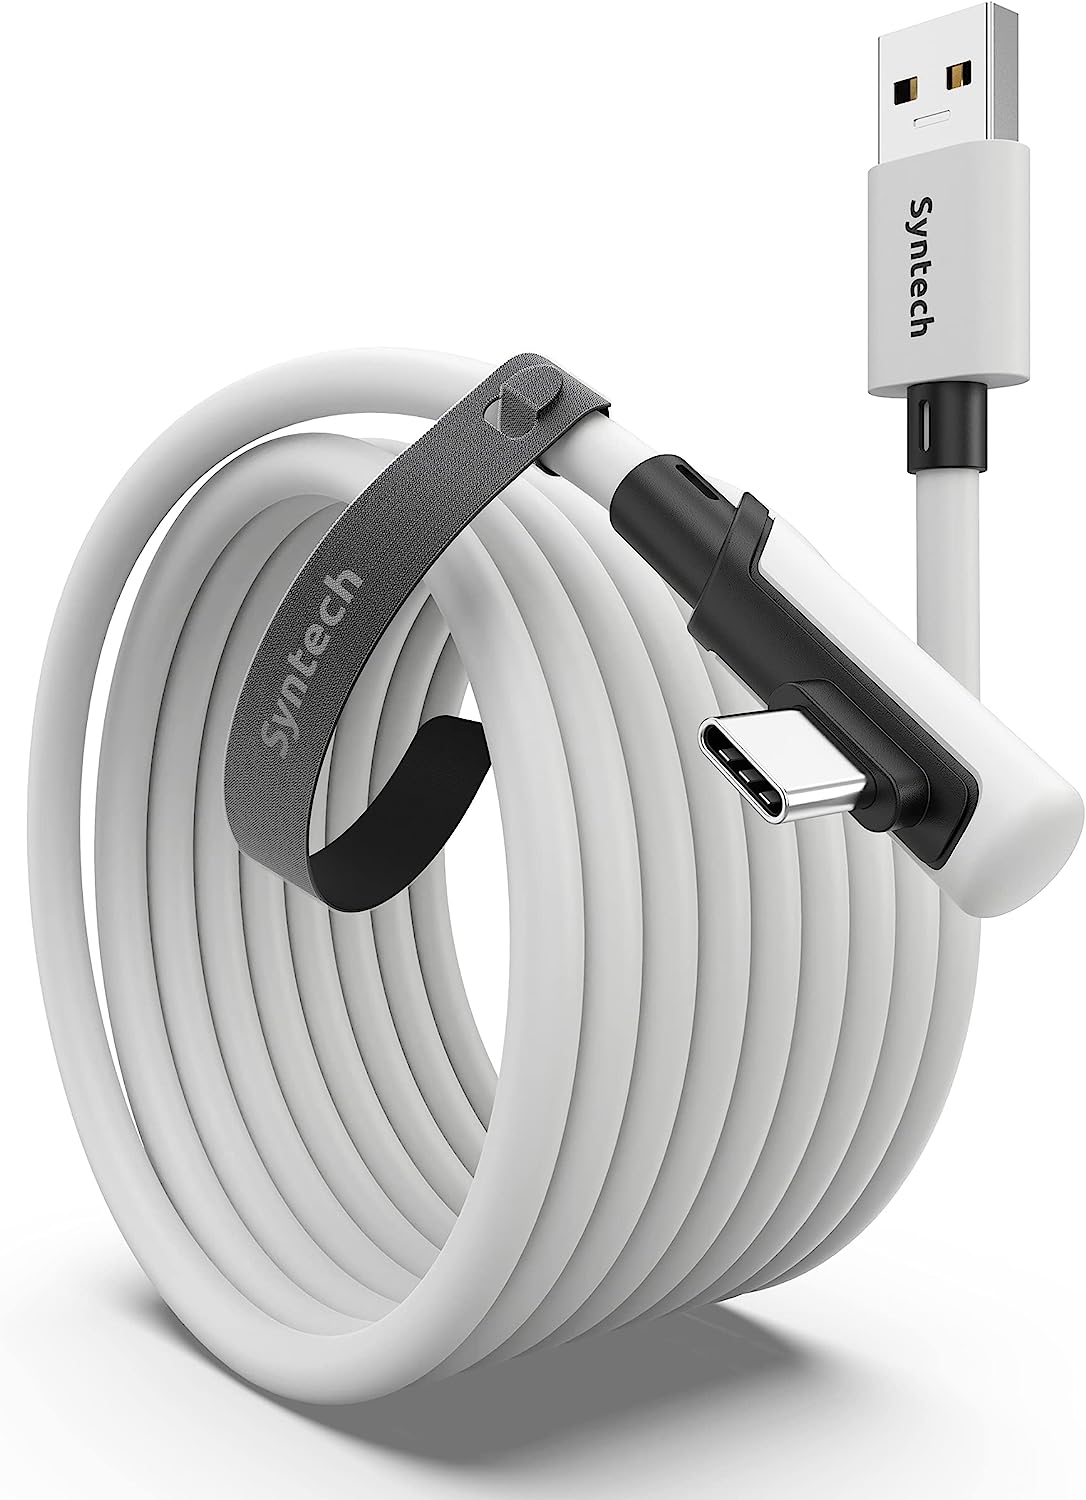 Best Quest 3 accessories - PC VR link cable from Syntech